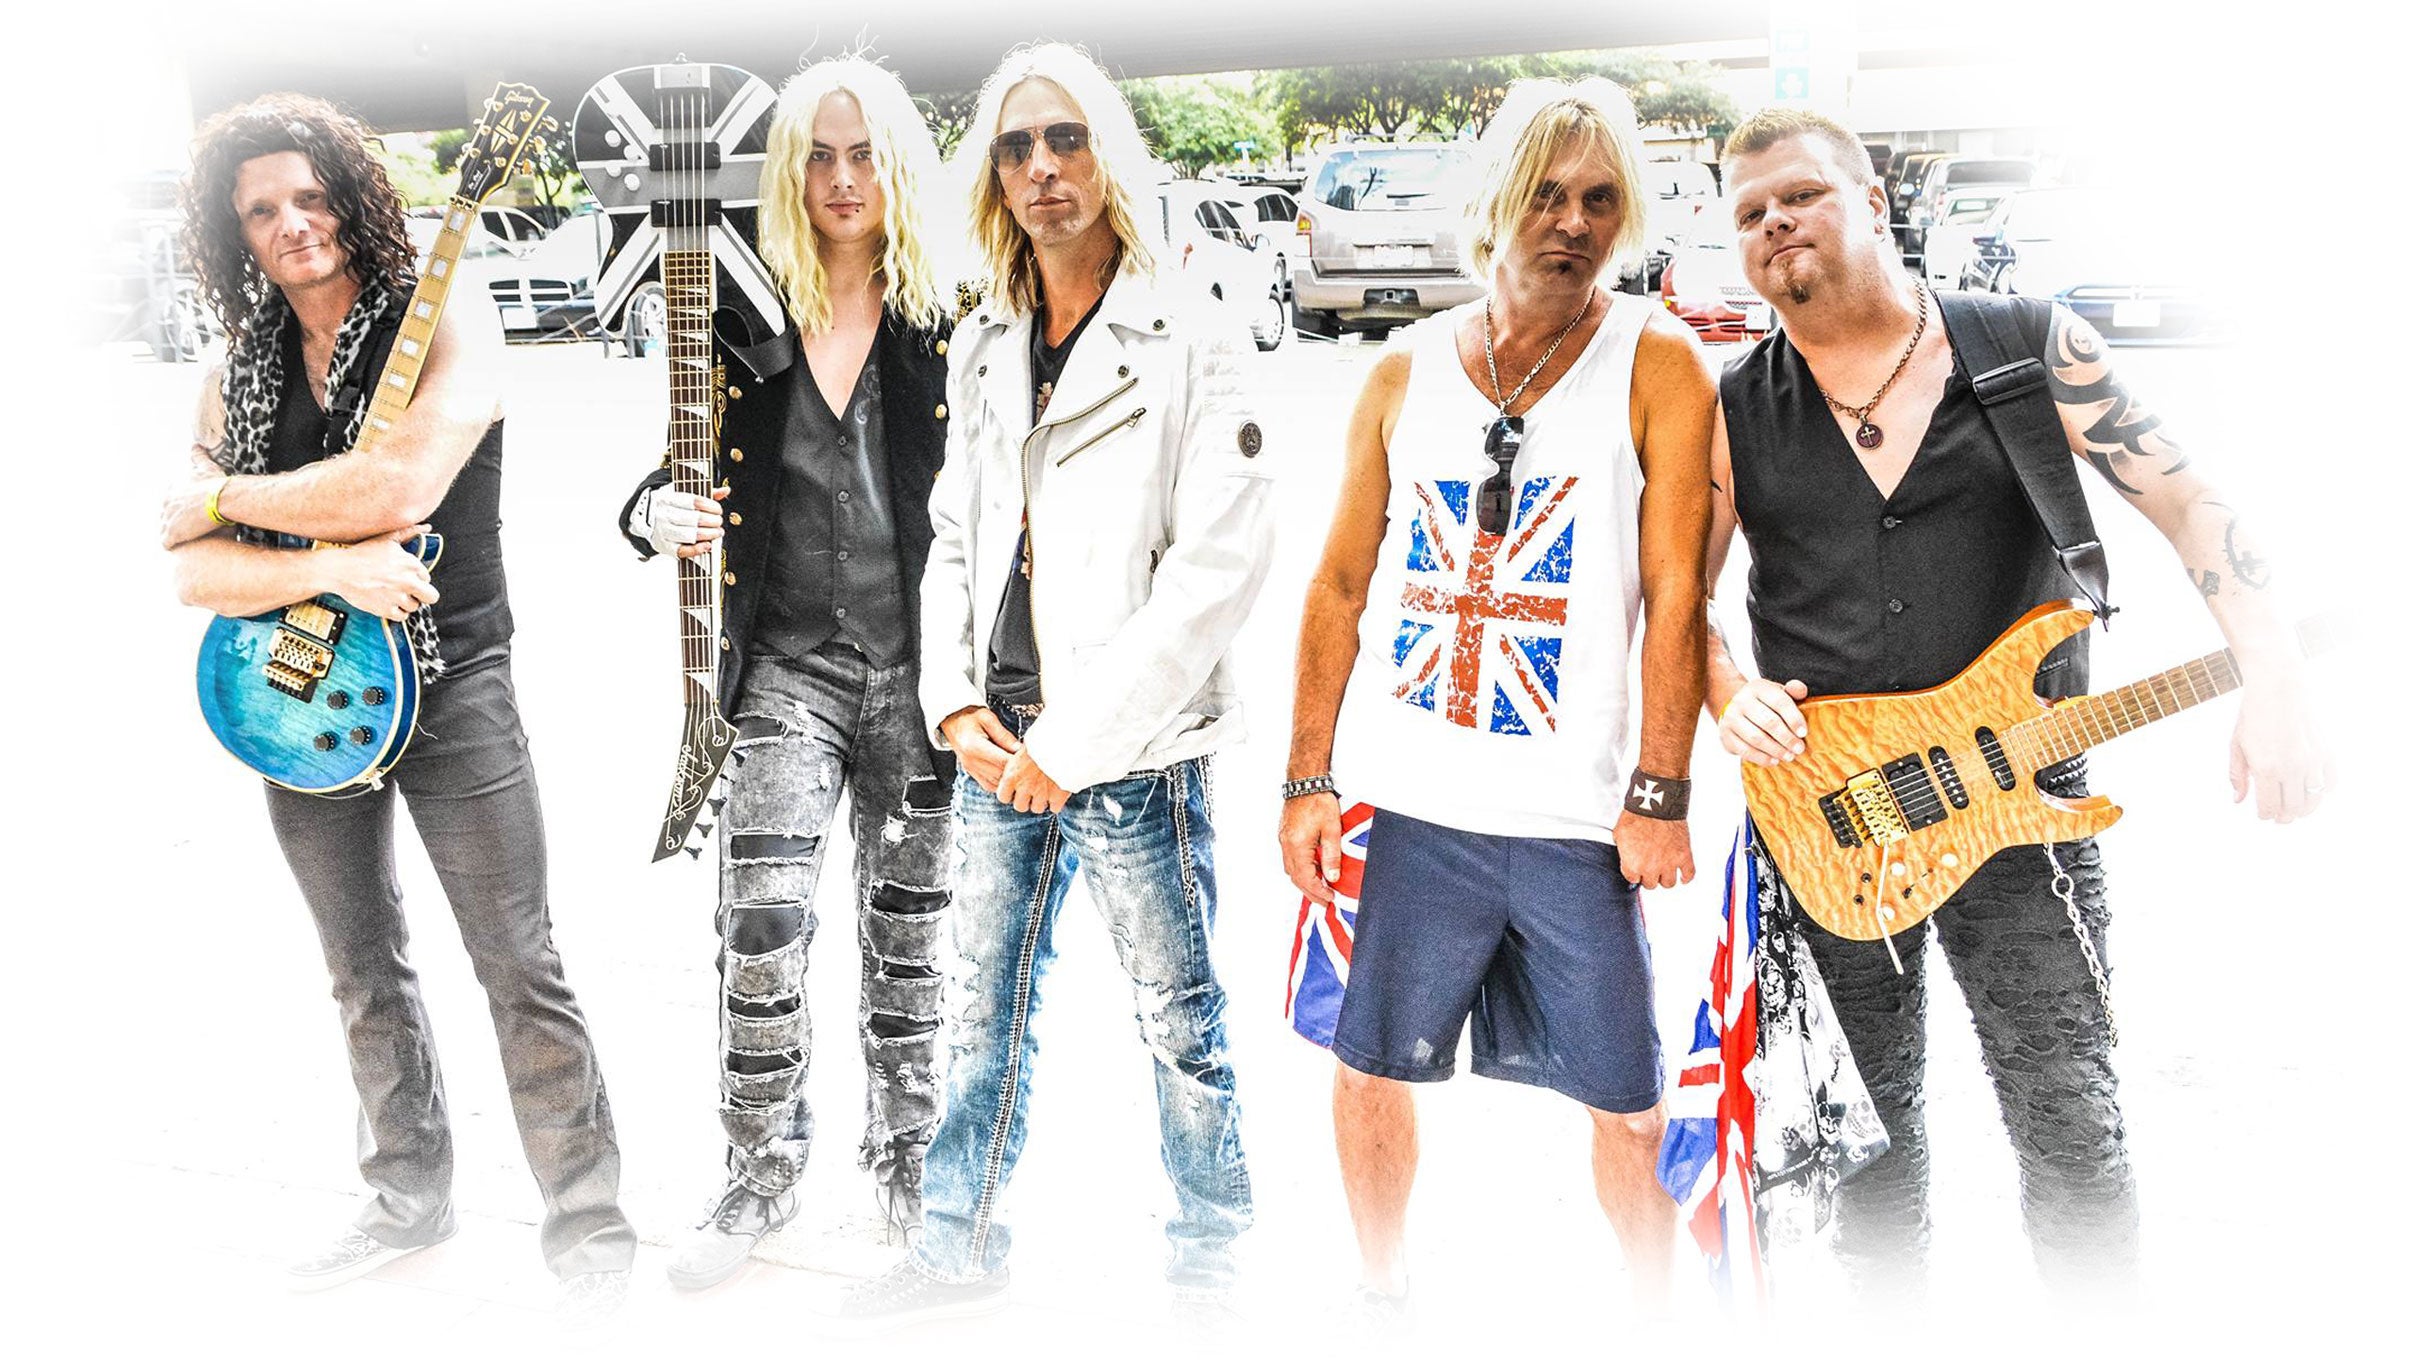 Def Leggend - The World's Greatest Tribute To Def Leppard in Louisville promo photo for Ticketmaster presale offer code